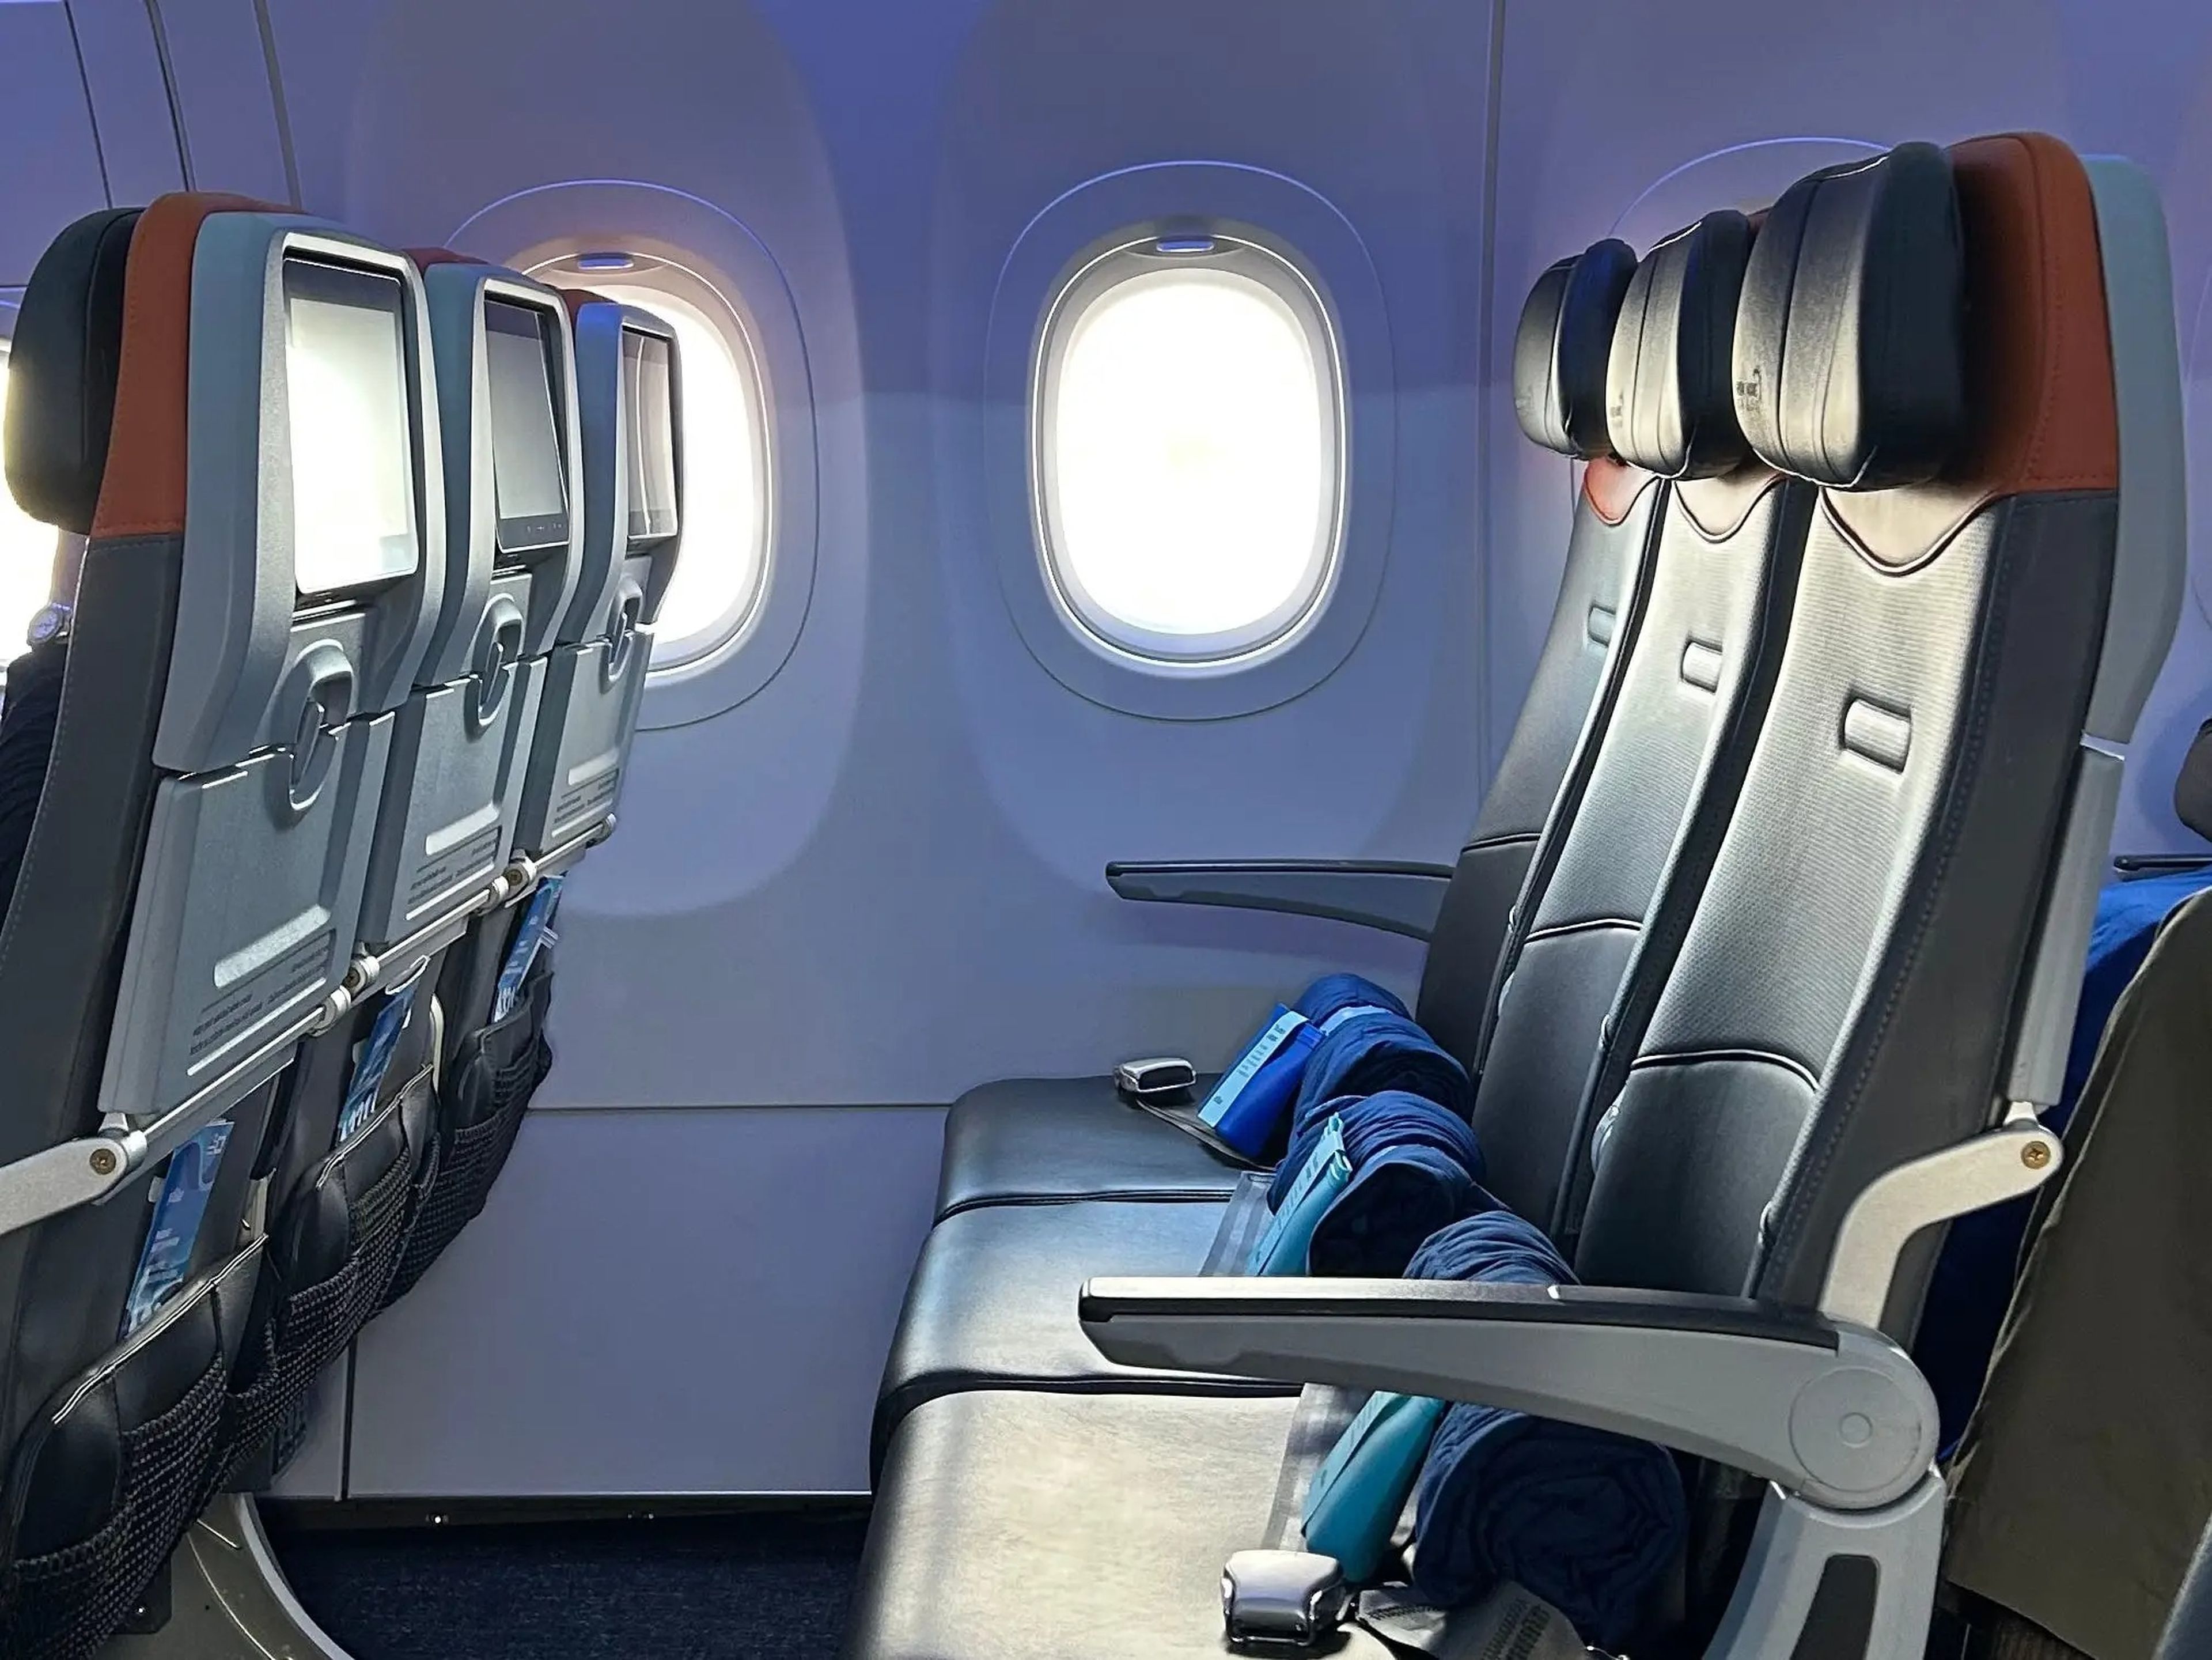 A row of Even More Space seats on a JetBlue flight.